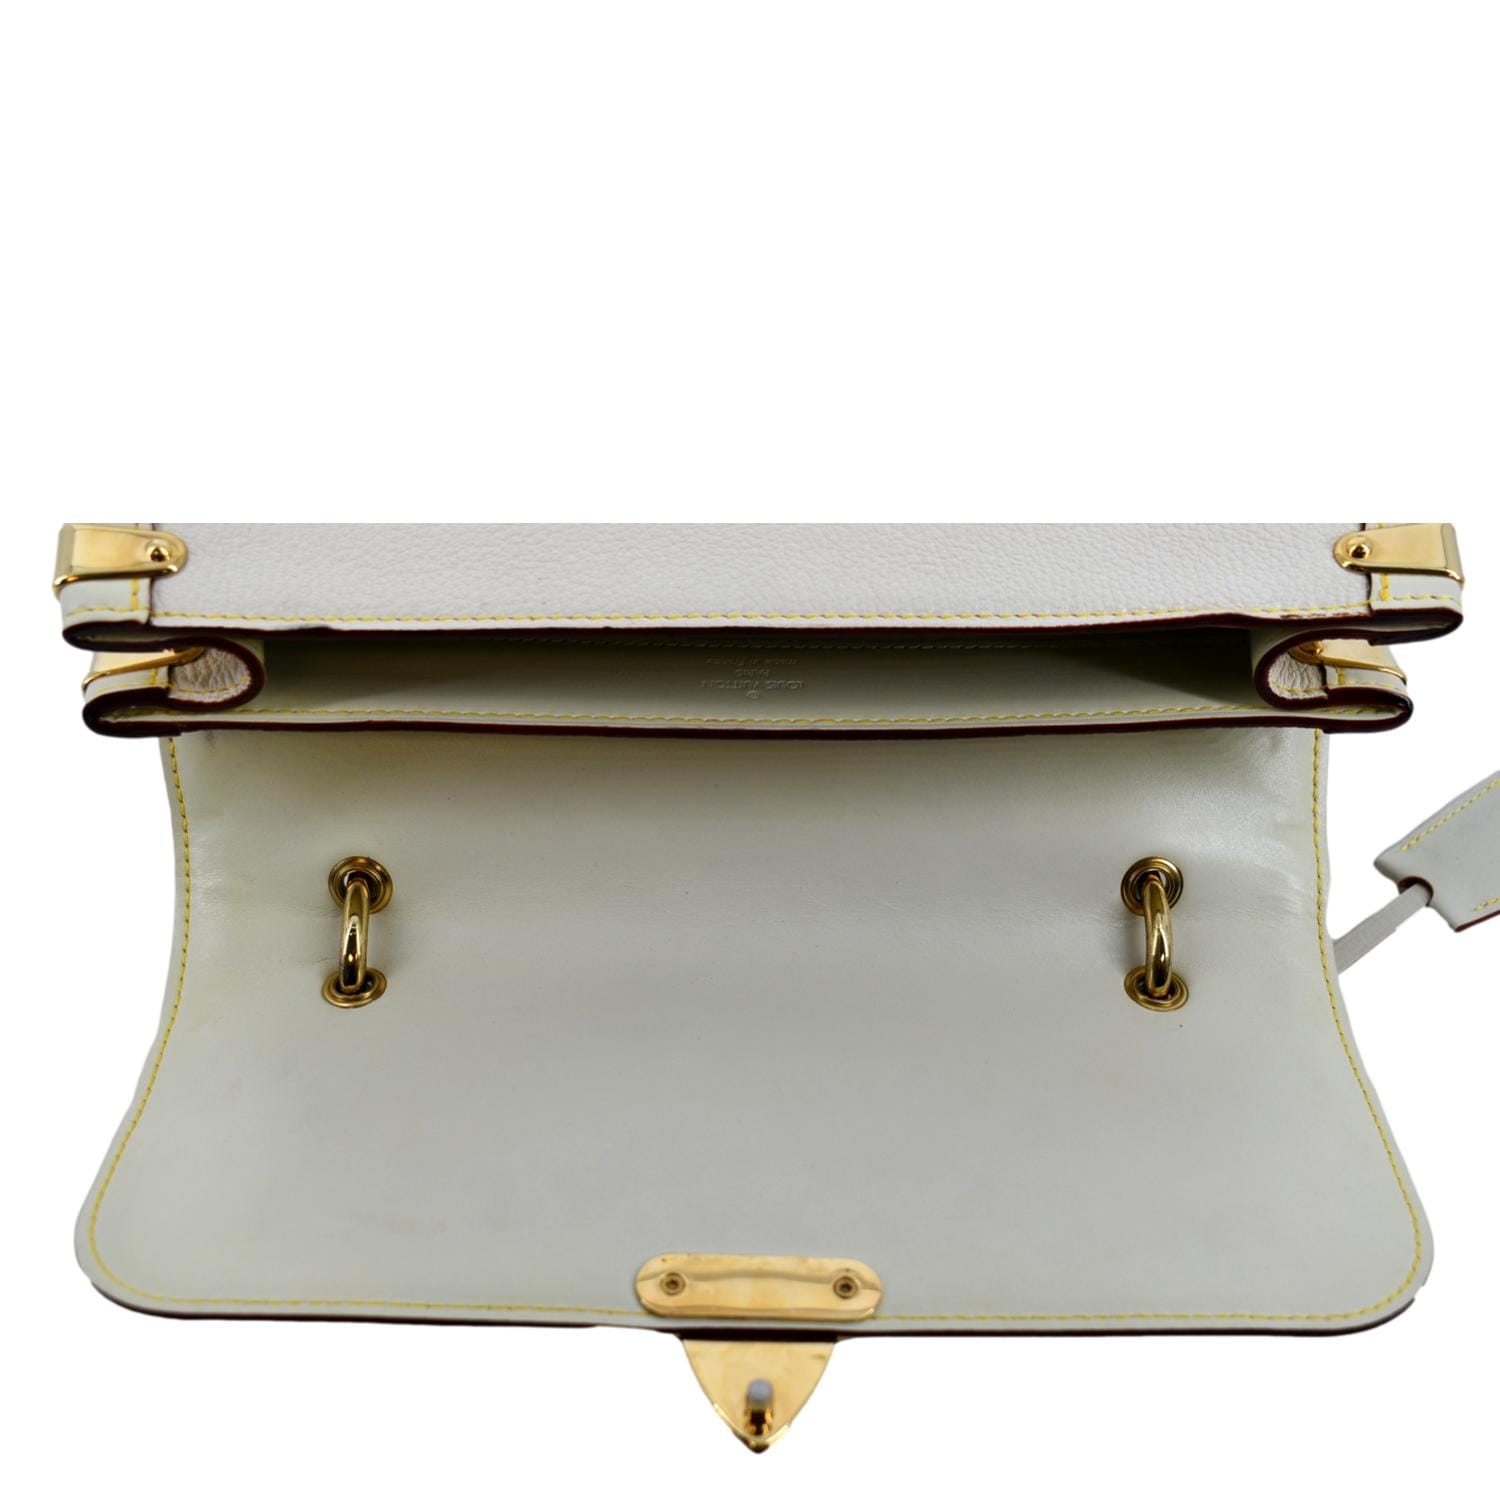 Louis Vuitton Le Talentueux Top Handle Bag White Leather With Gold Hardware